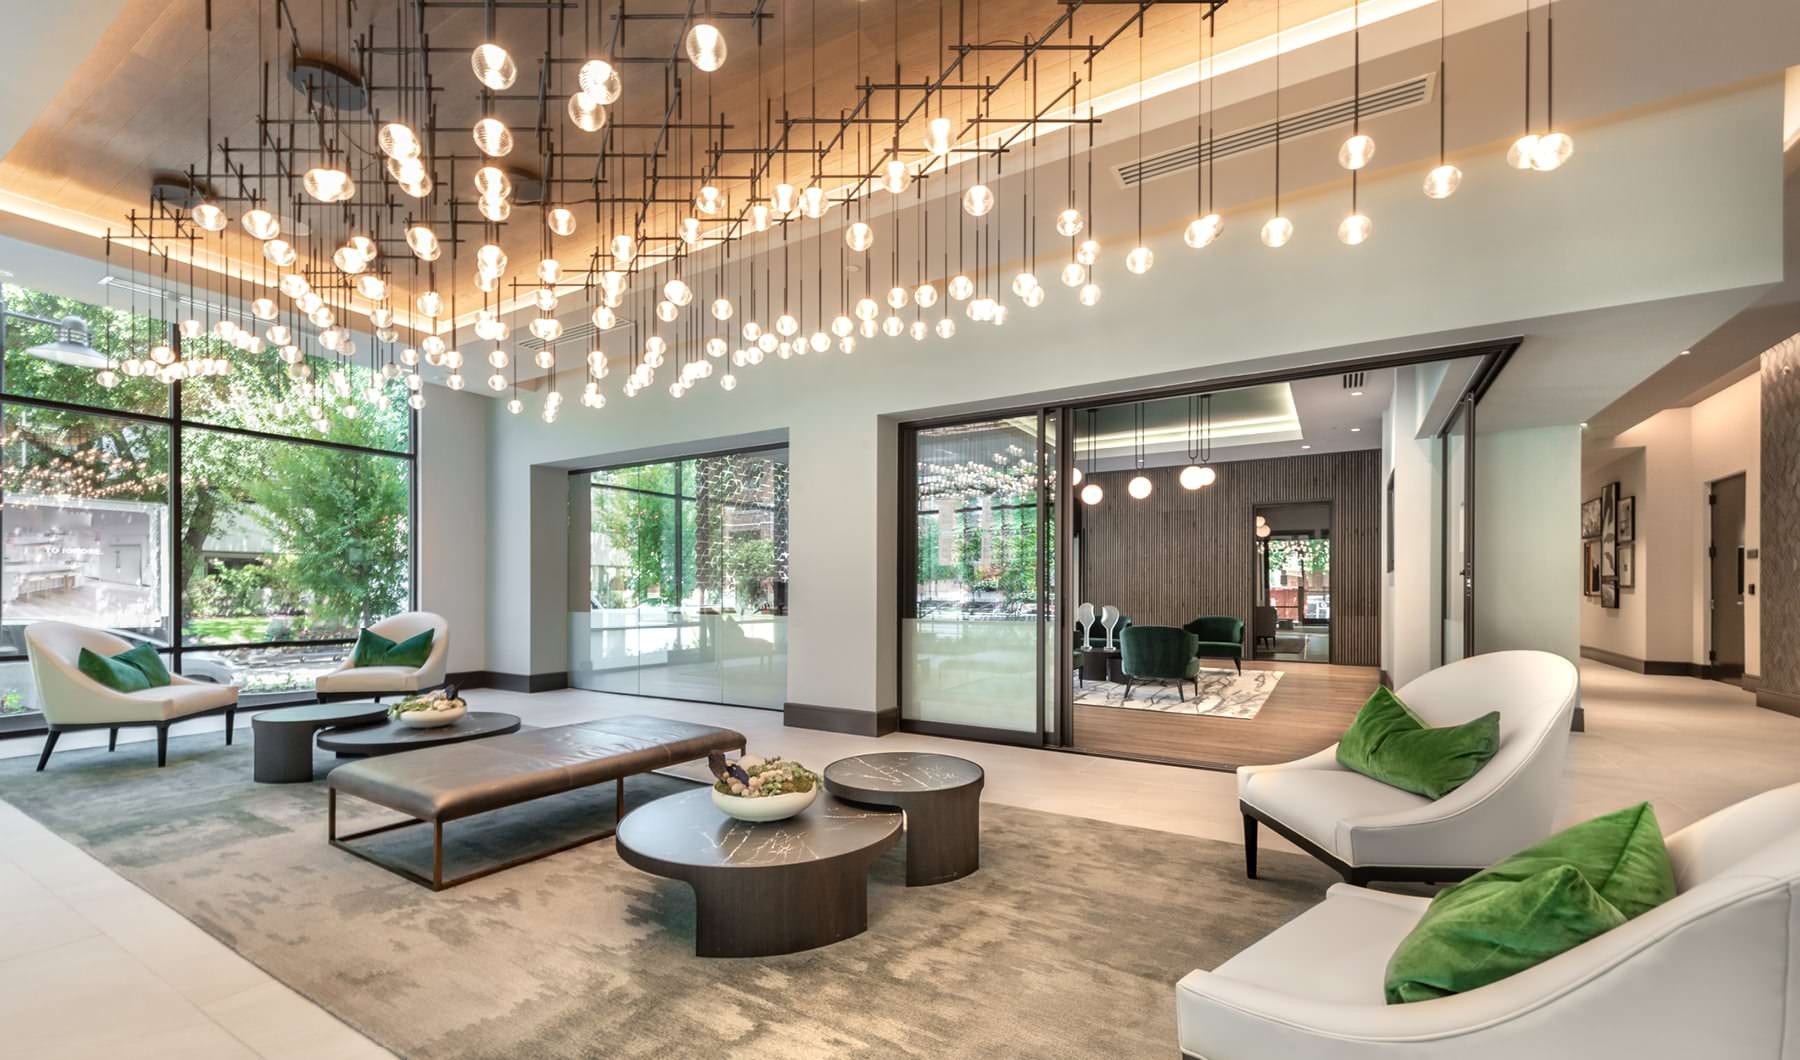 beautiful lighting grid hangs above lounge area in resident center